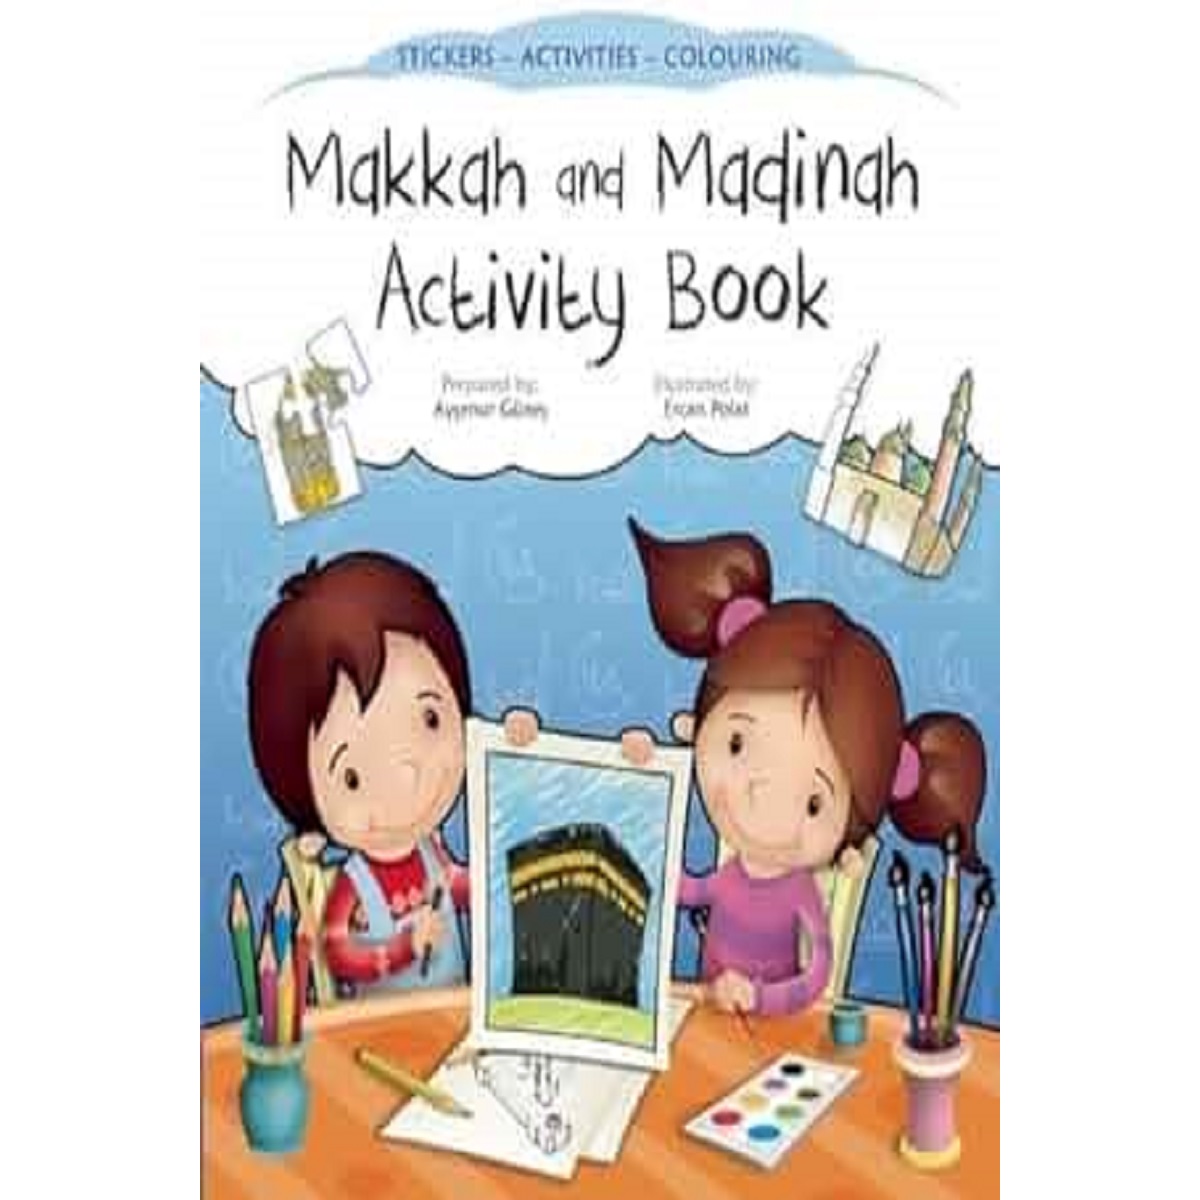 https://www.tarbiyahbooksplus.com/shop/islamic-books-and-products-for-children/shop-by-age-2-5-years/makkah-and-madinah-activity-book/